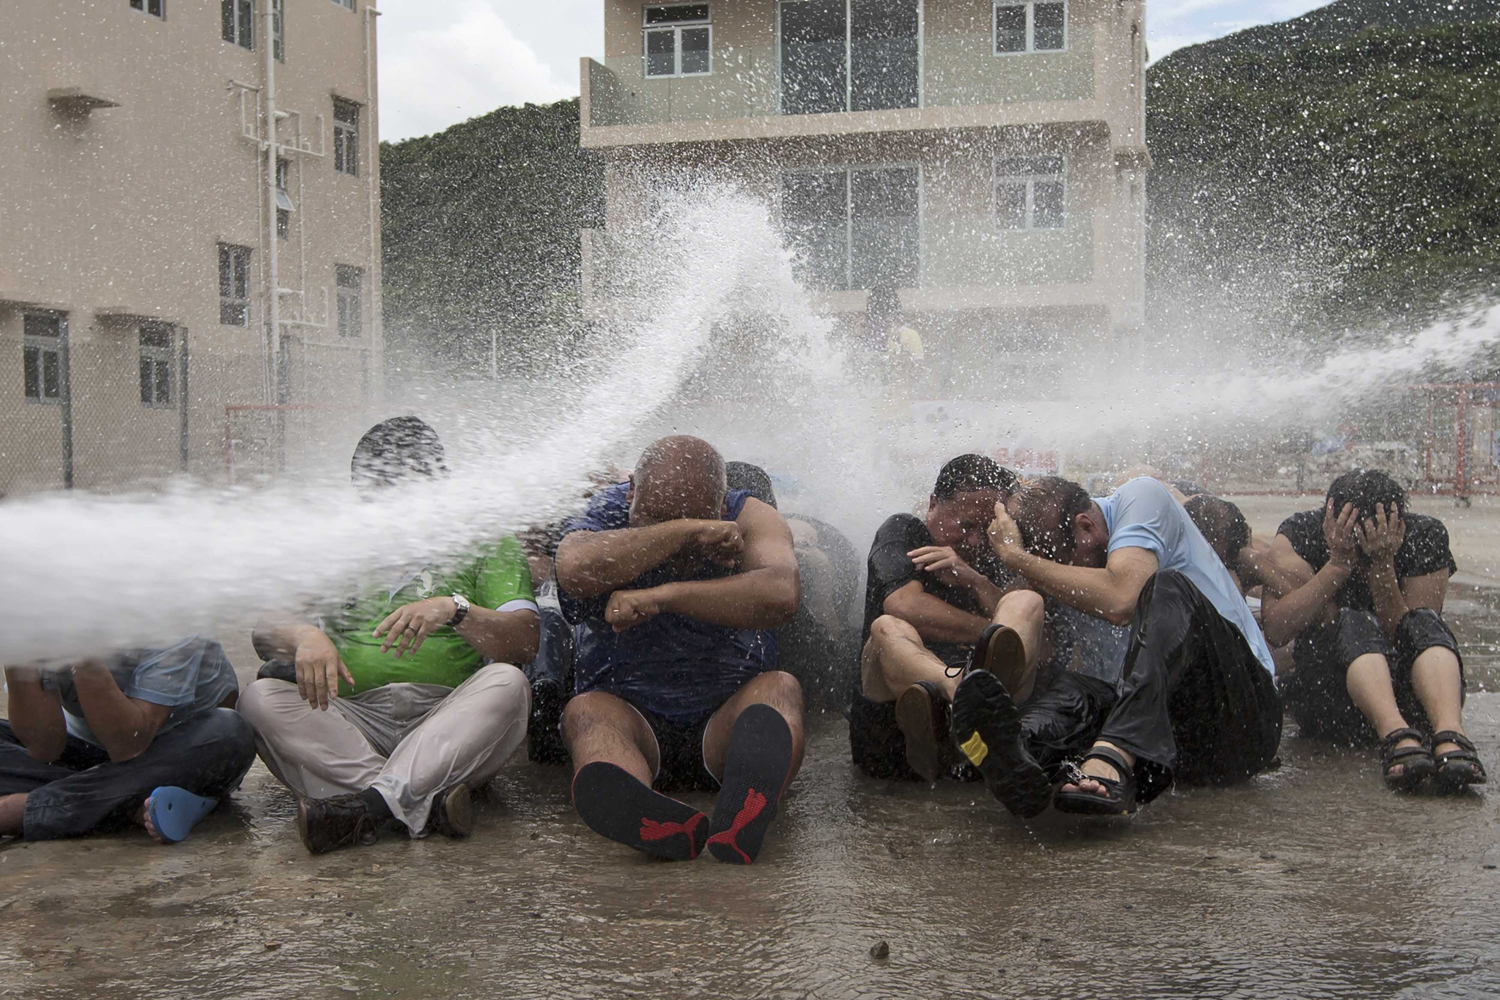 Sept. 7, 2014. Pro-democracy activists are hit with water during a drill to simulate the scenario of being sprayed with a water cannon at the upcoming  Occupy Central  movement rally in Hong Kong.